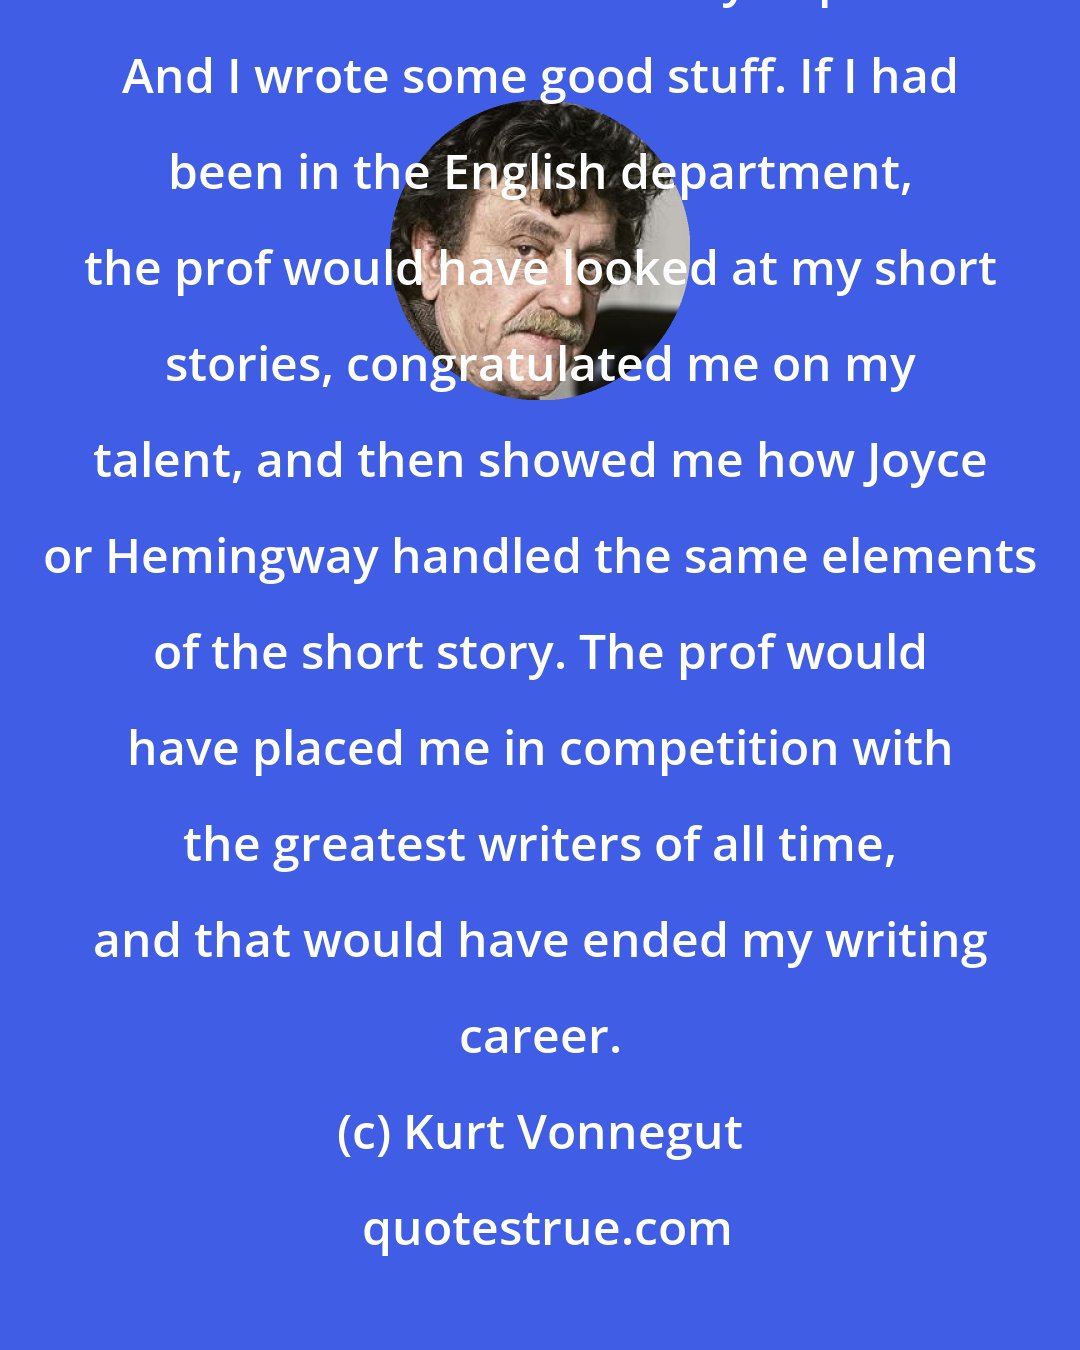 Kurt Vonnegut: I think I succeeded as a writer because I did not come out of an English department. I used to write in the chemistry department. And I wrote some good stuff. If I had been in the English department, the prof would have looked at my short stories, congratulated me on my talent, and then showed me how Joyce or Hemingway handled the same elements of the short story. The prof would have placed me in competition with the greatest writers of all time, and that would have ended my writing career.